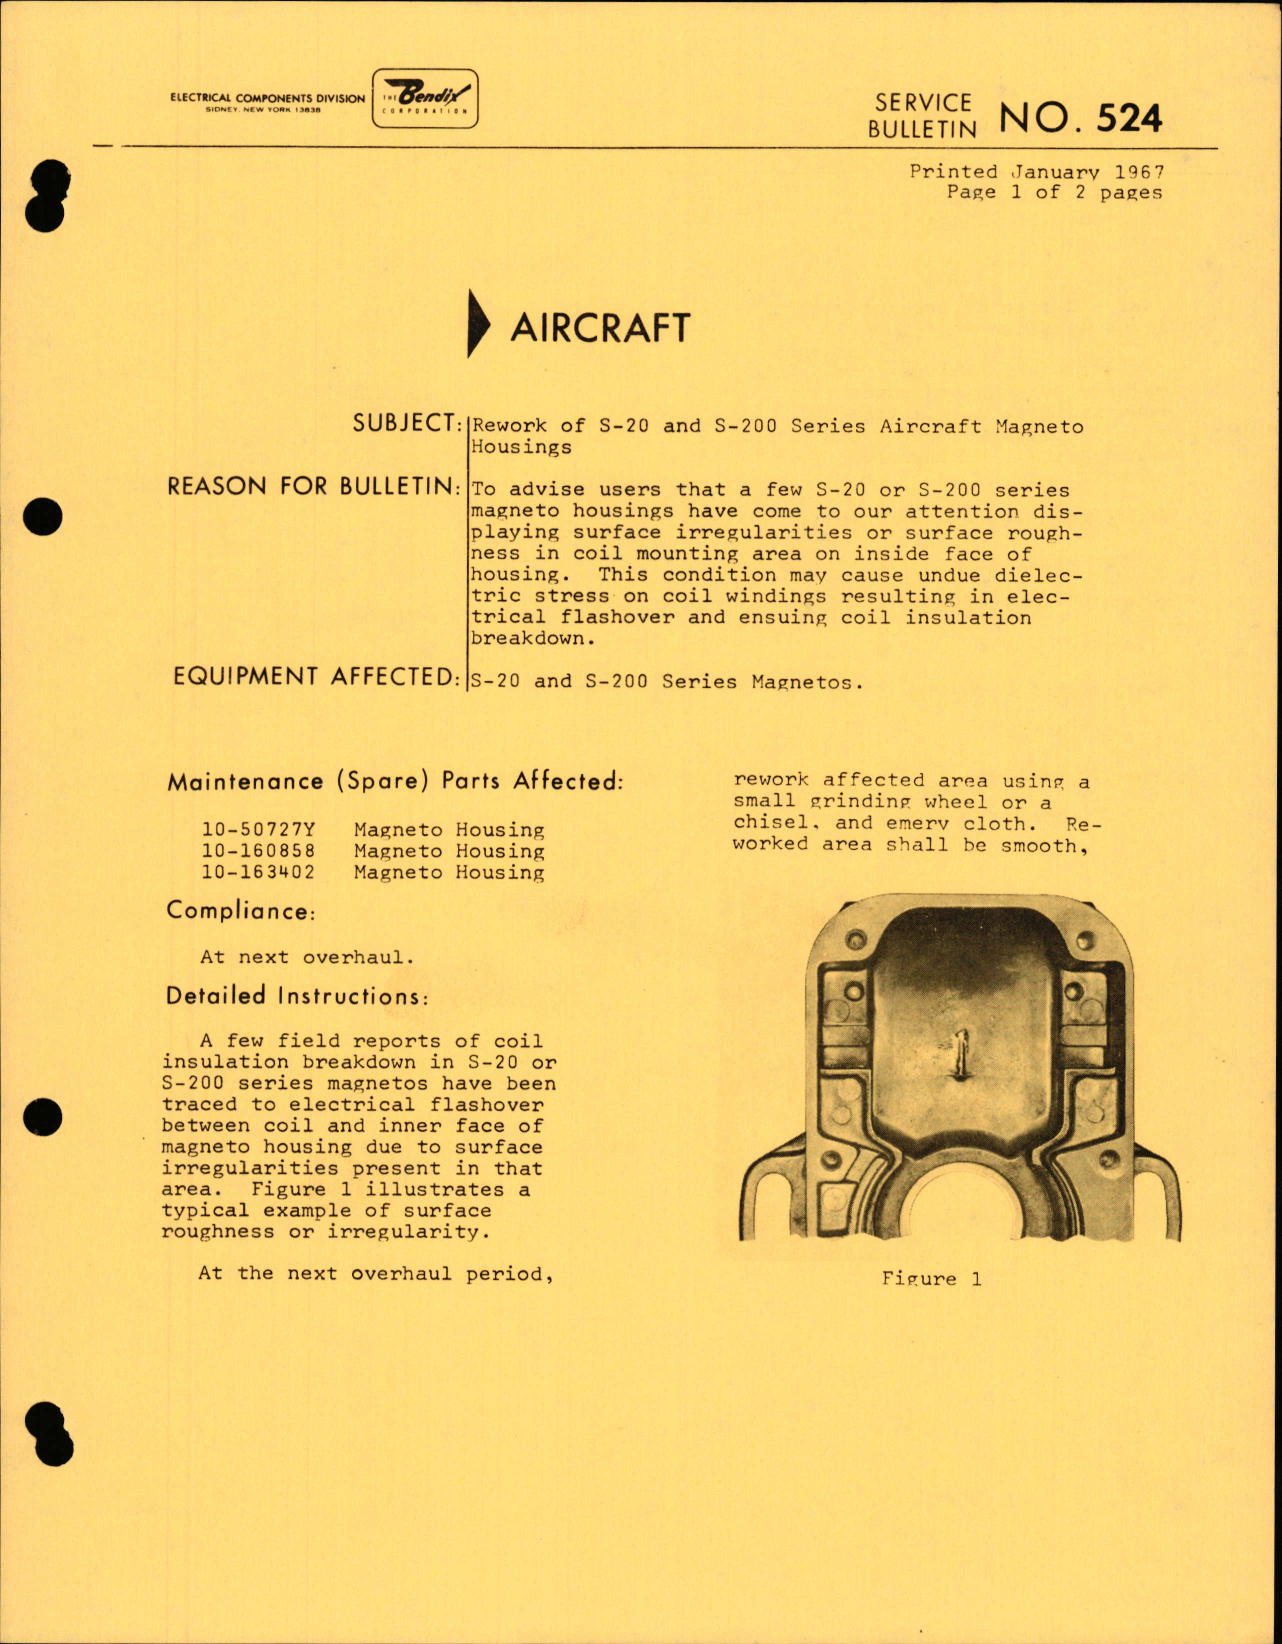 Sample page 1 from AirCorps Library document: Rework of S-20 and S-200 Series Aircraft Magneto Housings